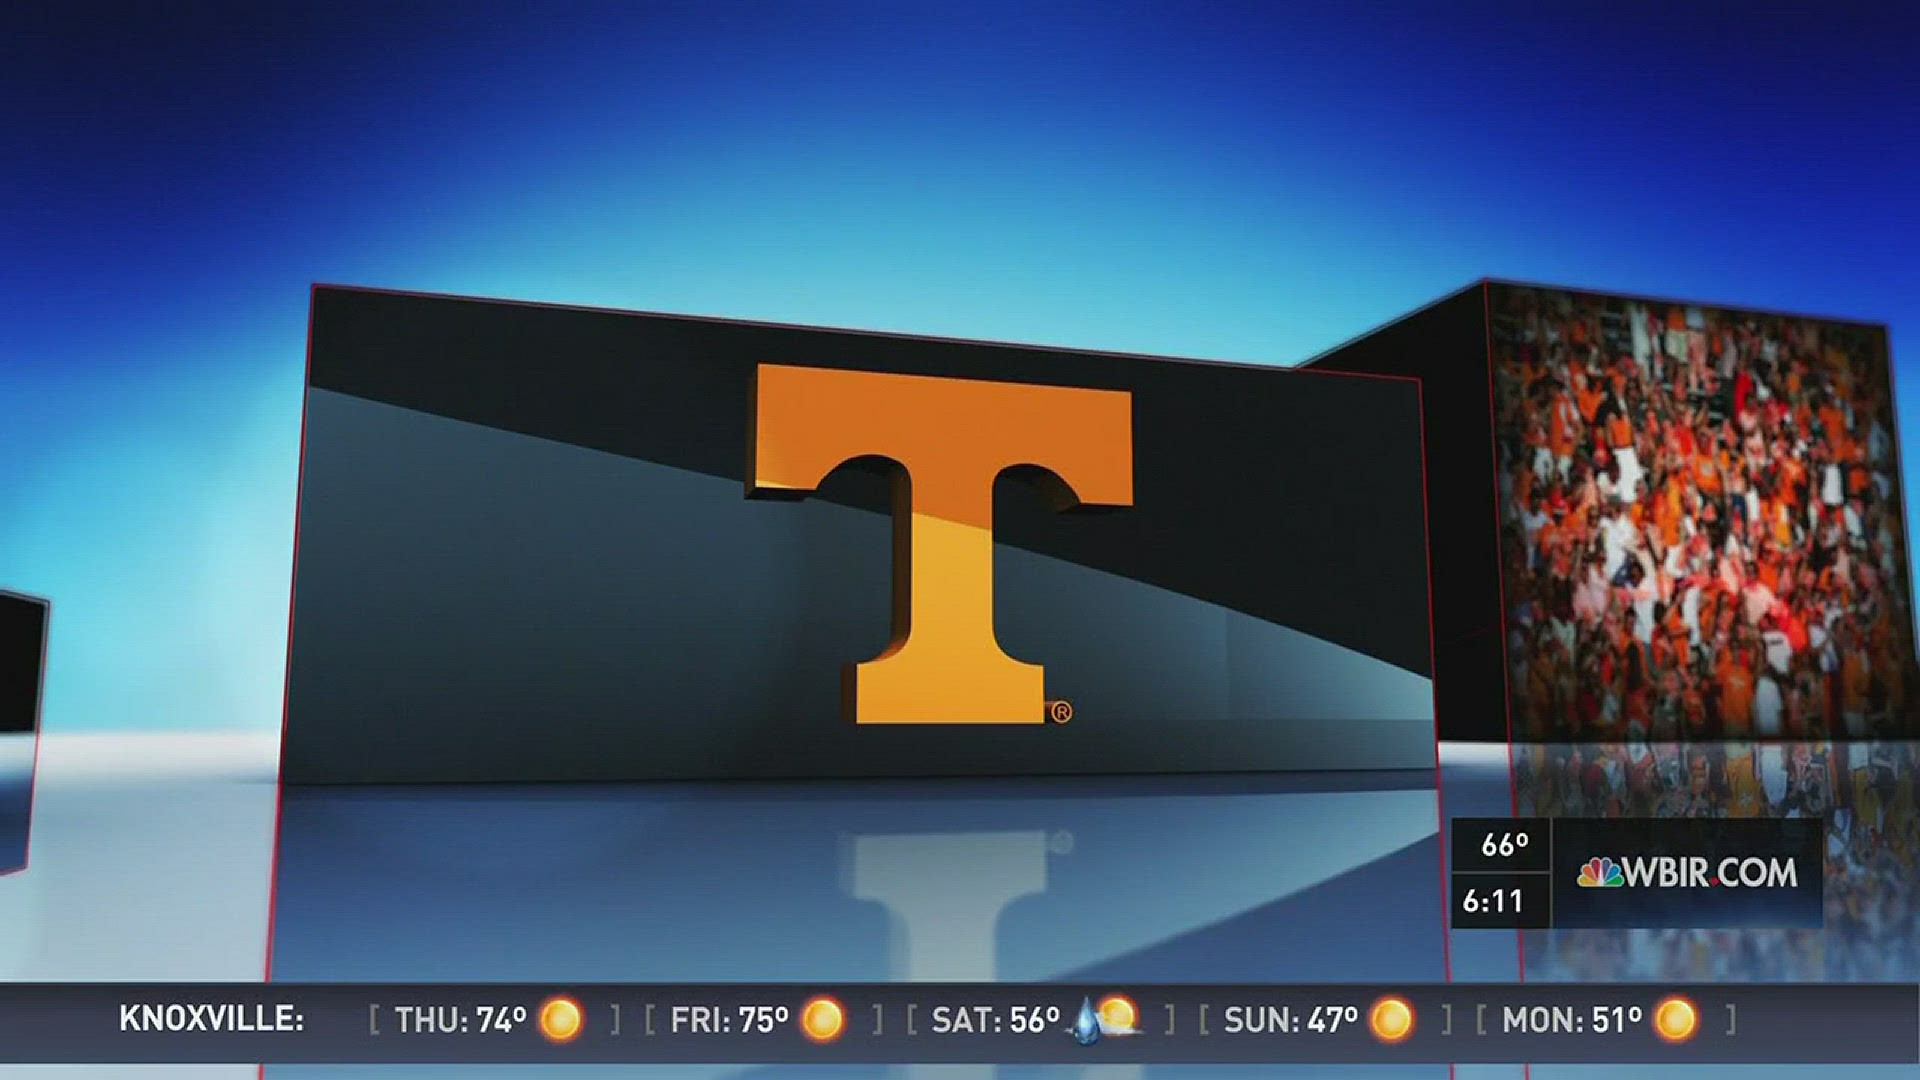 Tennessee's seniors will play at Neyland Stadium for the final time on Saturday. Butch Jones talks about what the senior class has meant to the program.